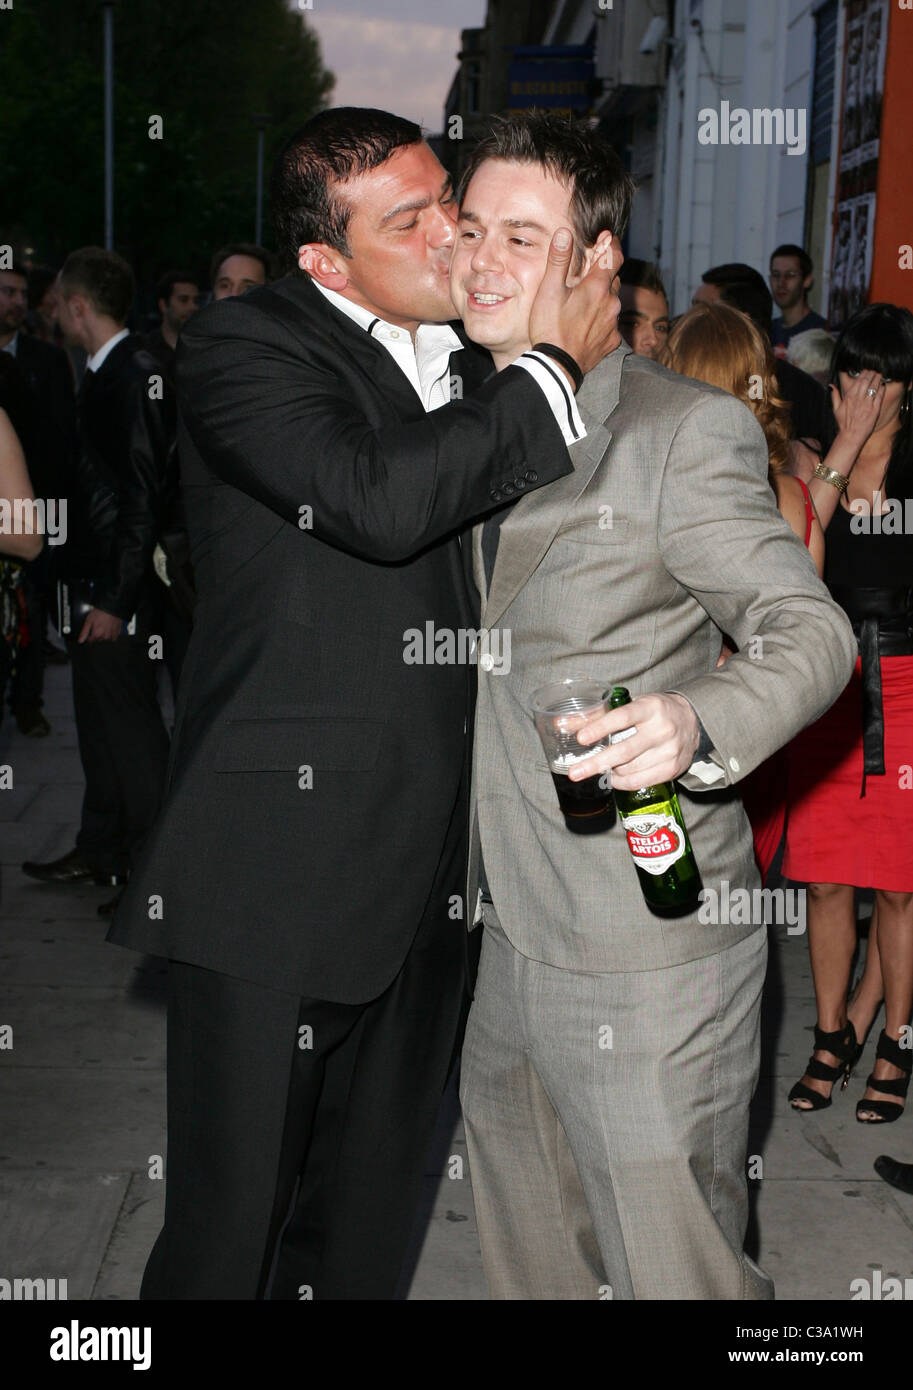 Tamer Hassan and Danny Dyer The 'City Rats' premiere as part of the East London Film Festival held at the Genesis Cinema in Stock Photo